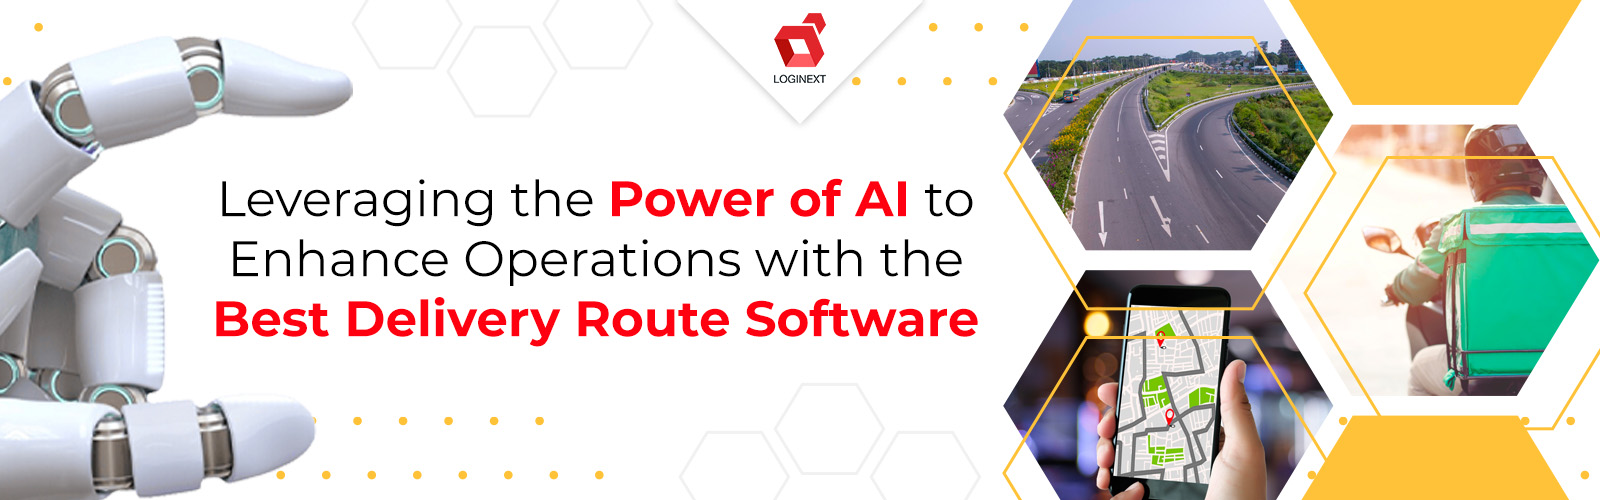 Role of AI in the best delivery route software